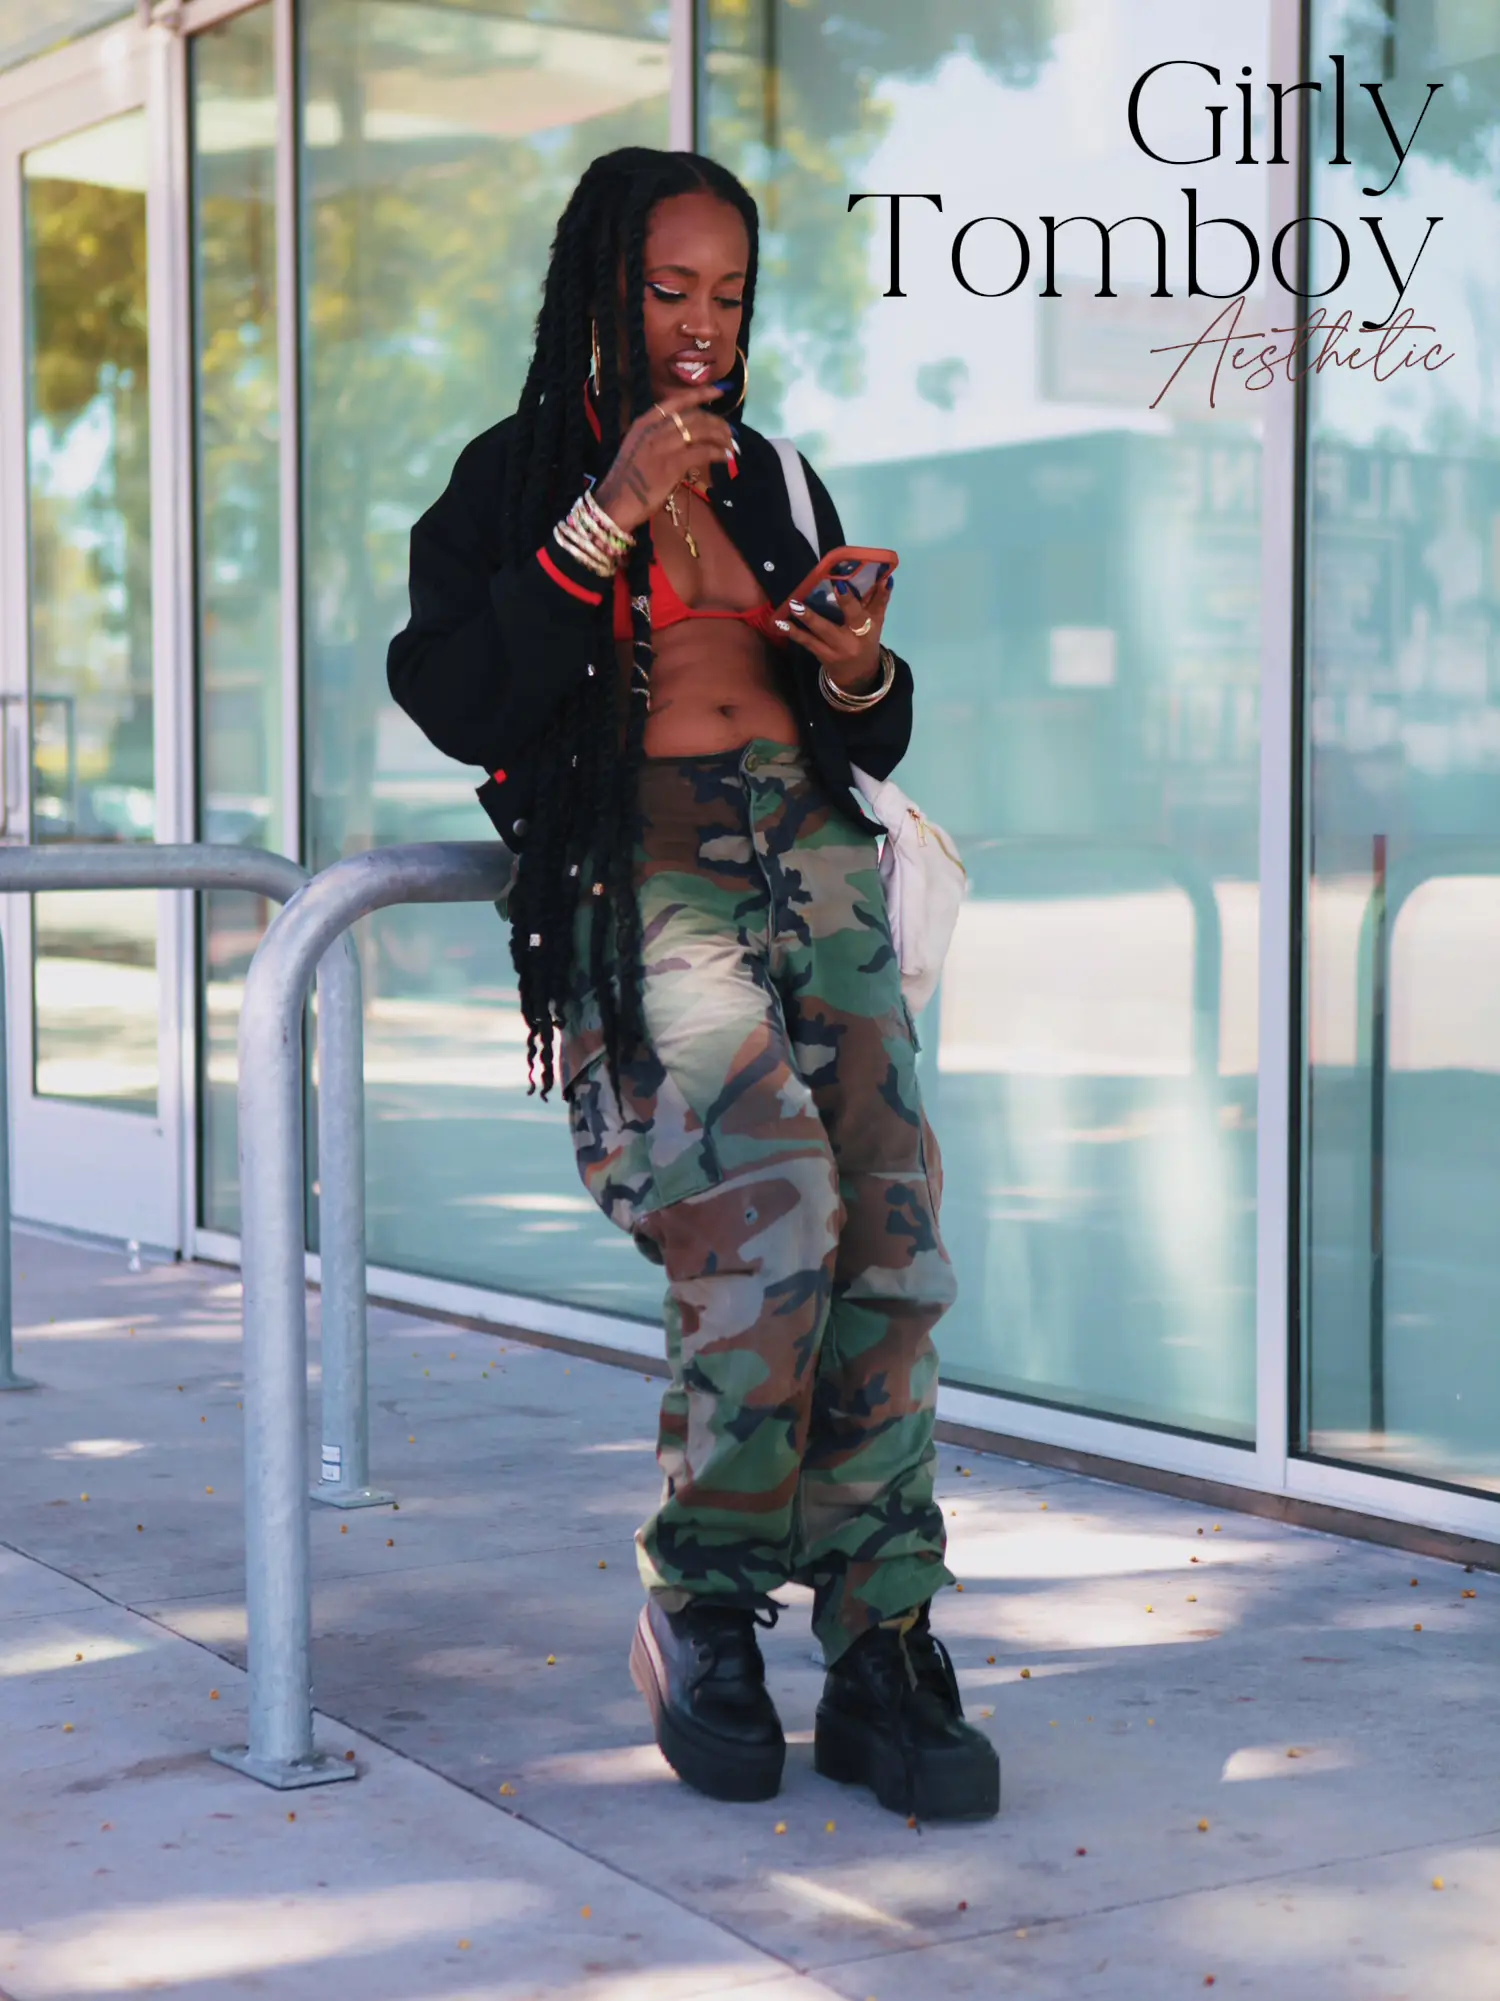 Tomboy meets Femininity, Gallery posted by Shontel A